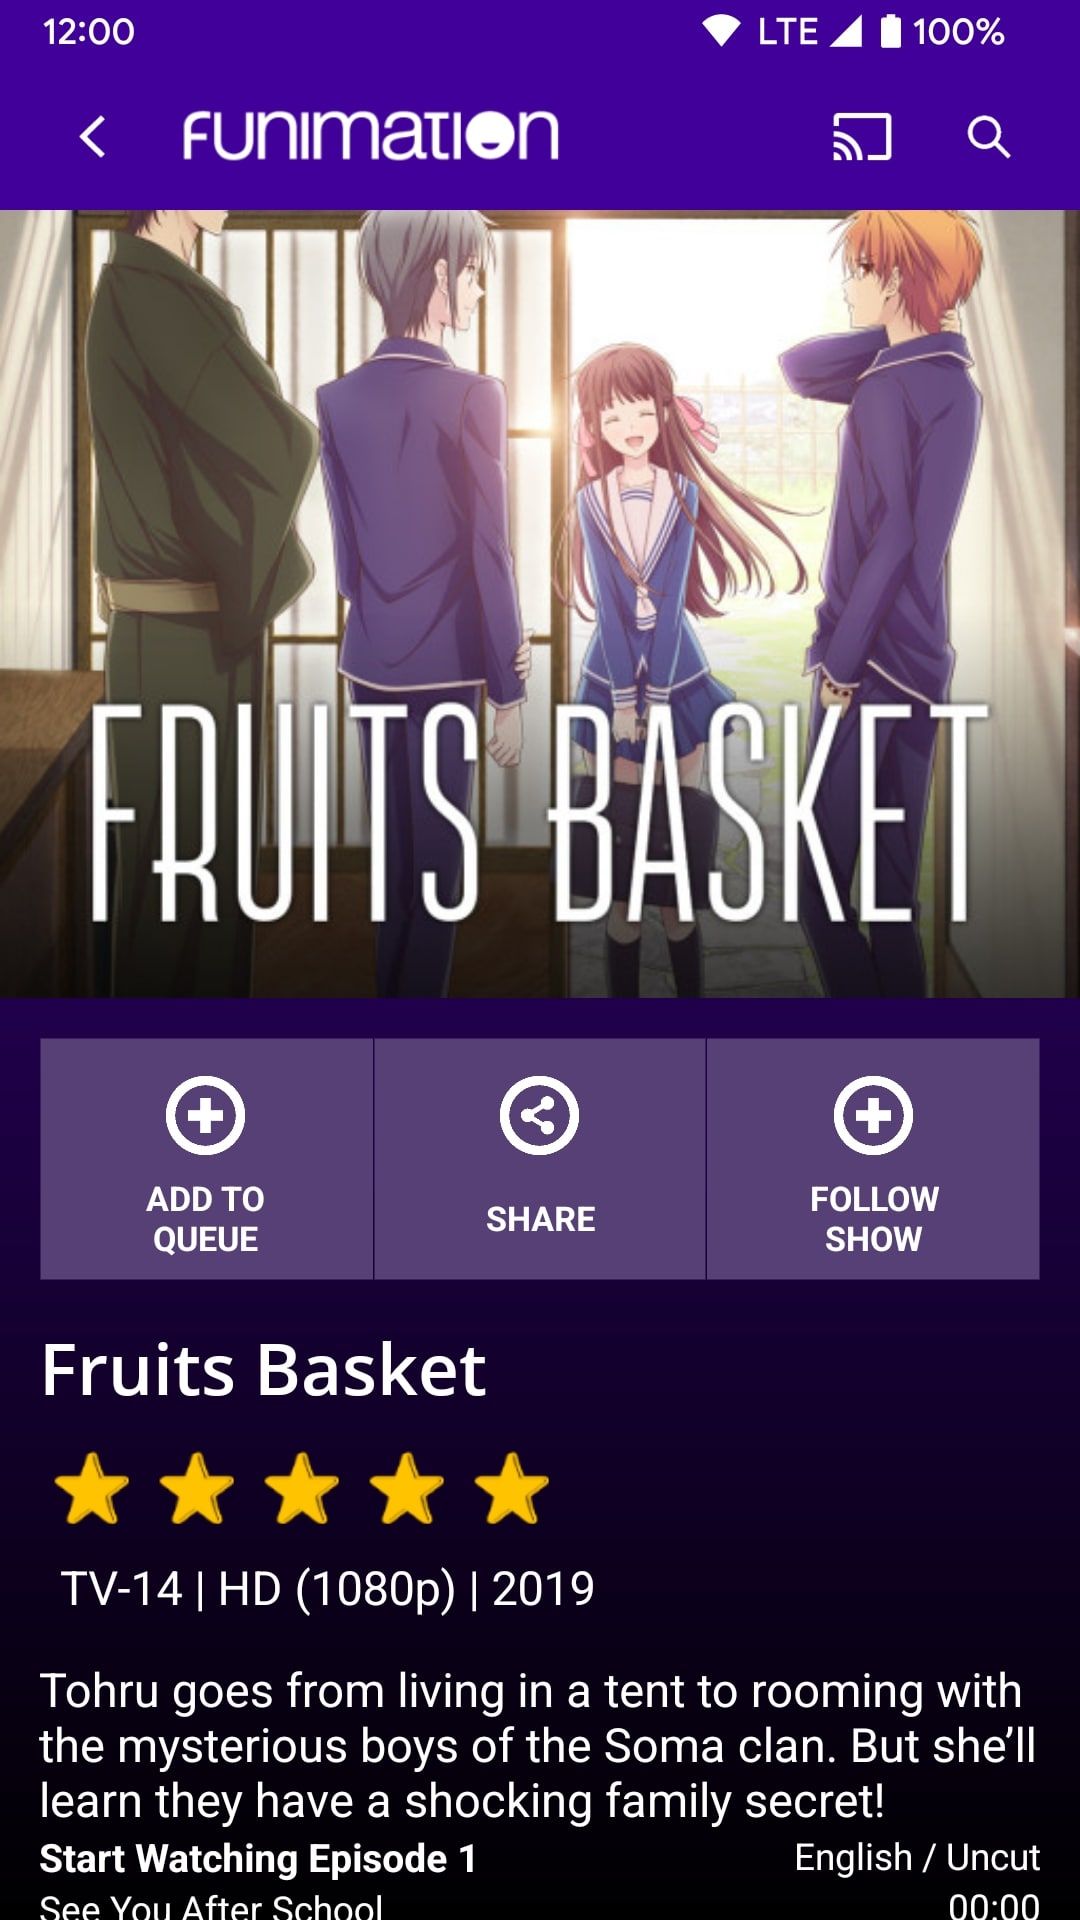 Funimation app's episodes and details page